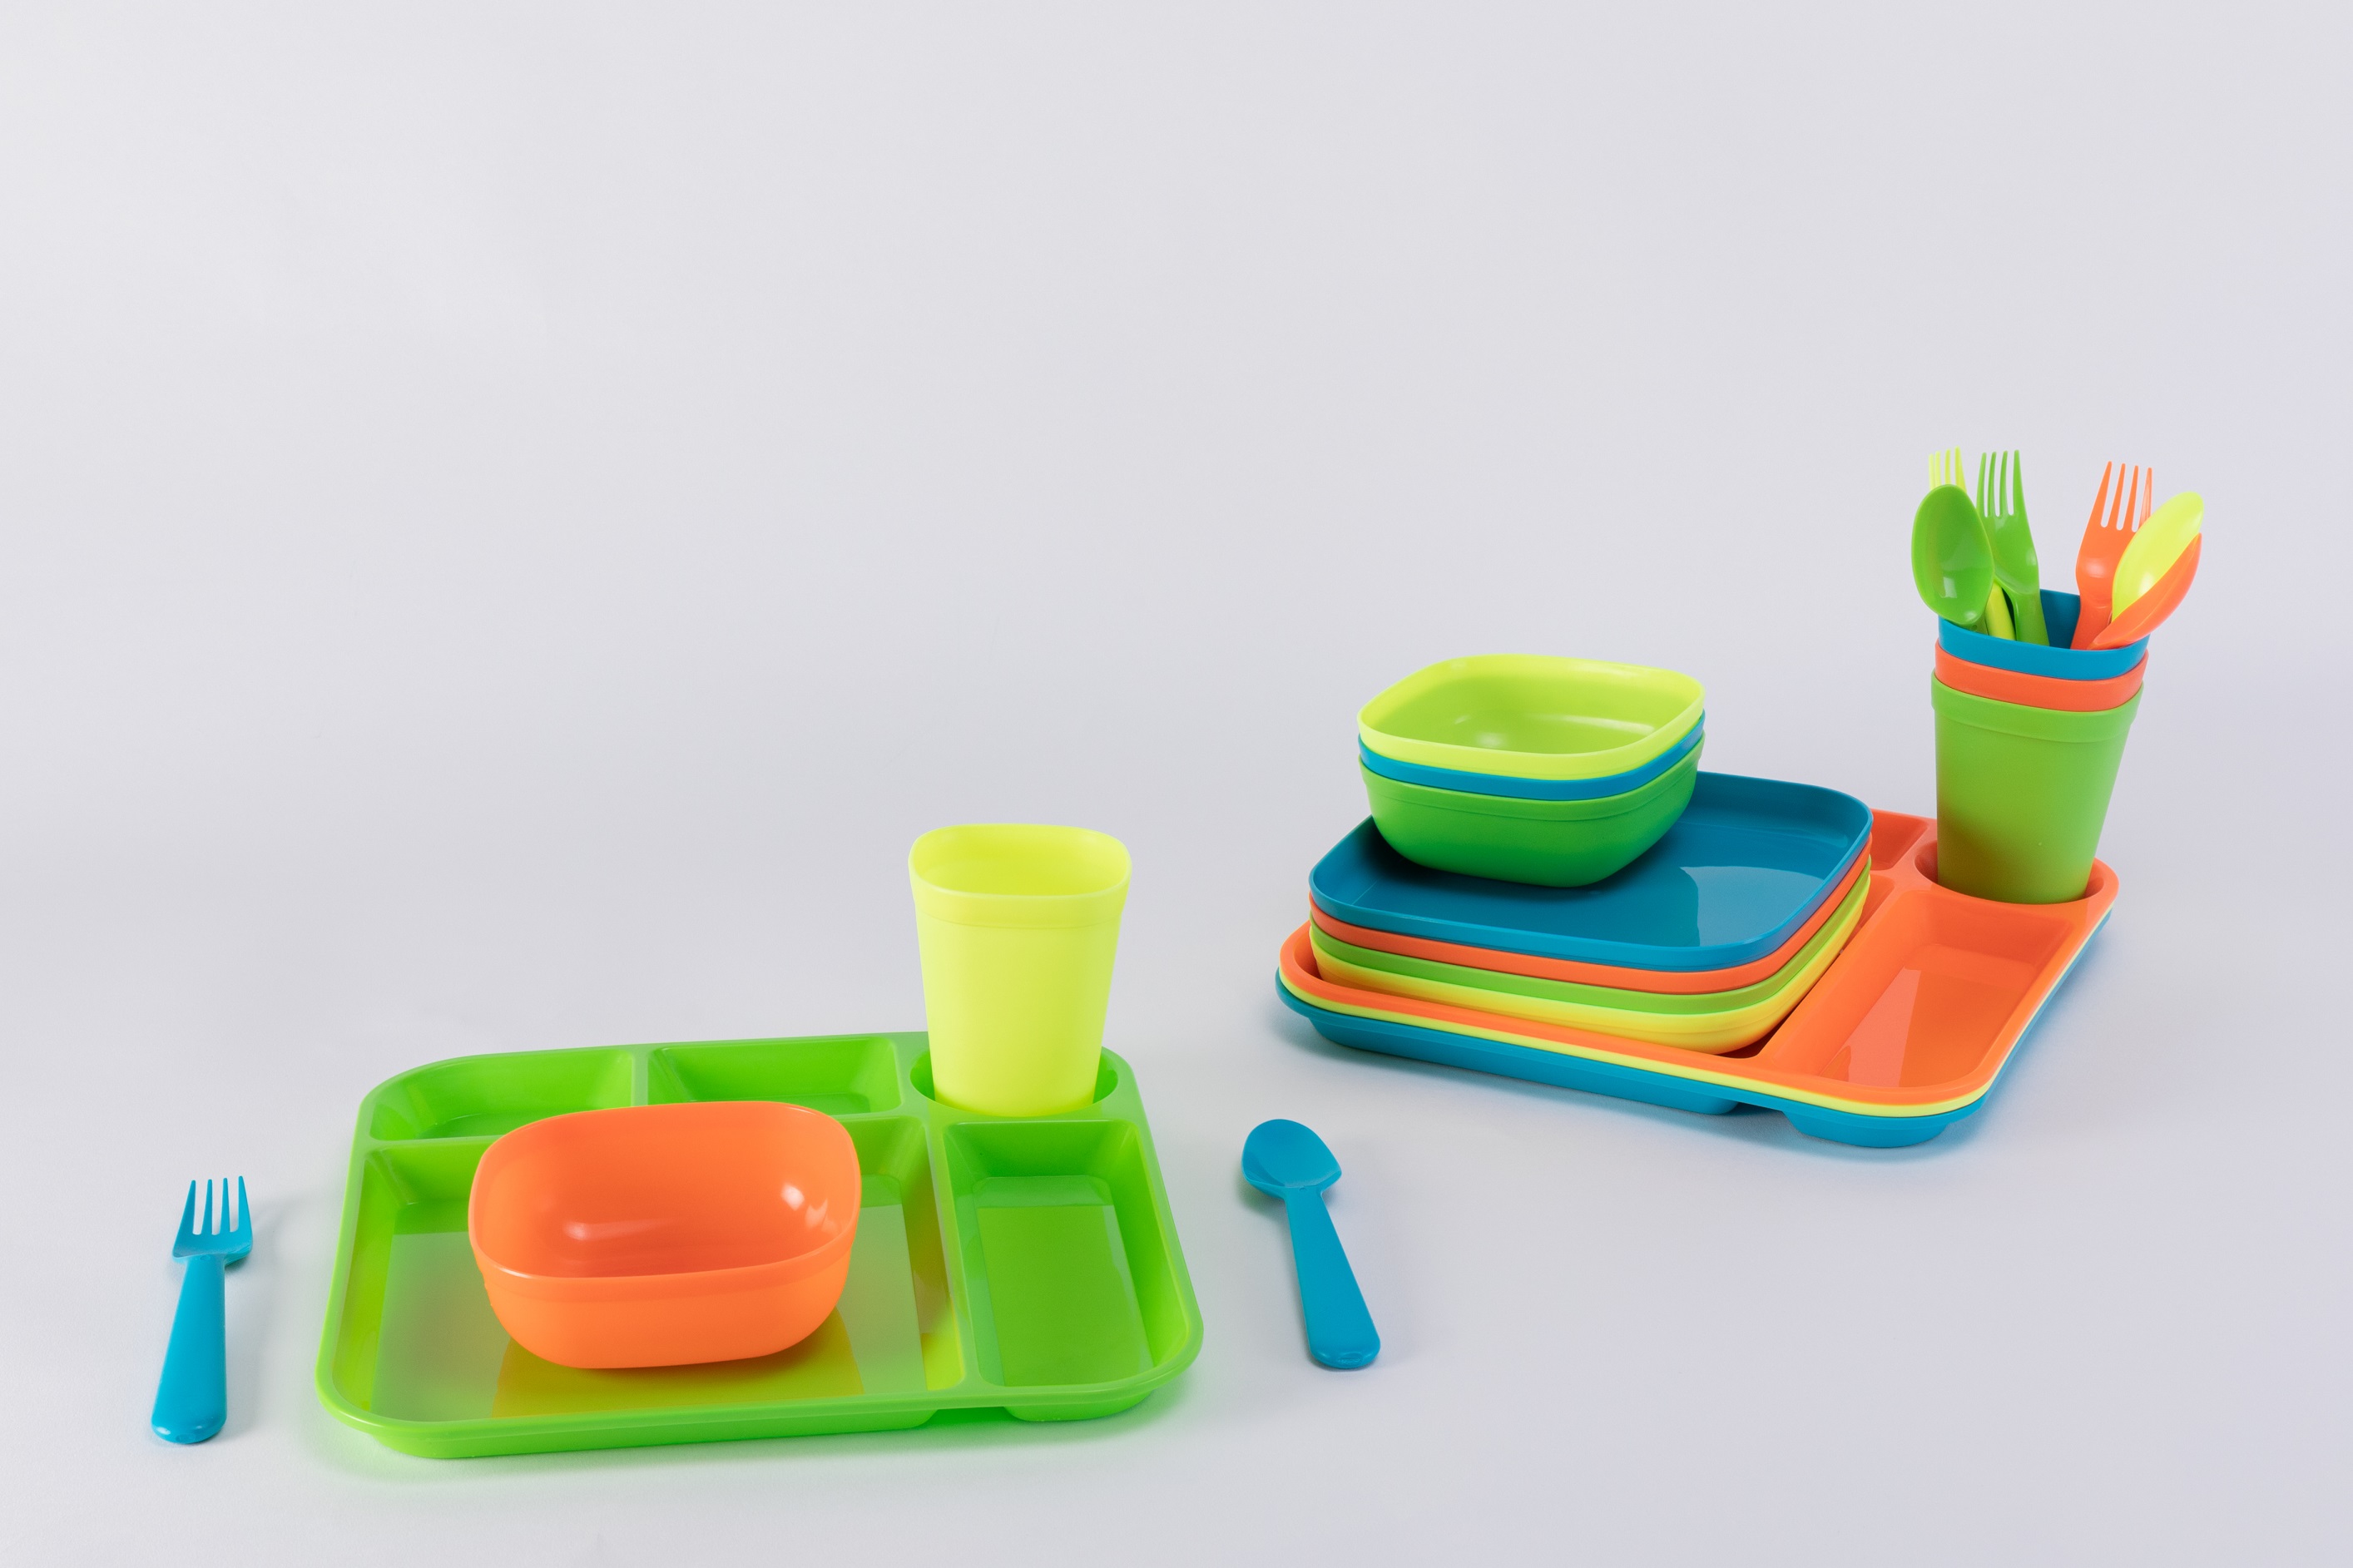 Your Zone 24 Piece Dinnerware Set for Kids with 4 each Trays, Bowls, Plates, Cups, Forks, Spoons in Bright Blue, Green, Orange, Yellow - image 2 of 13